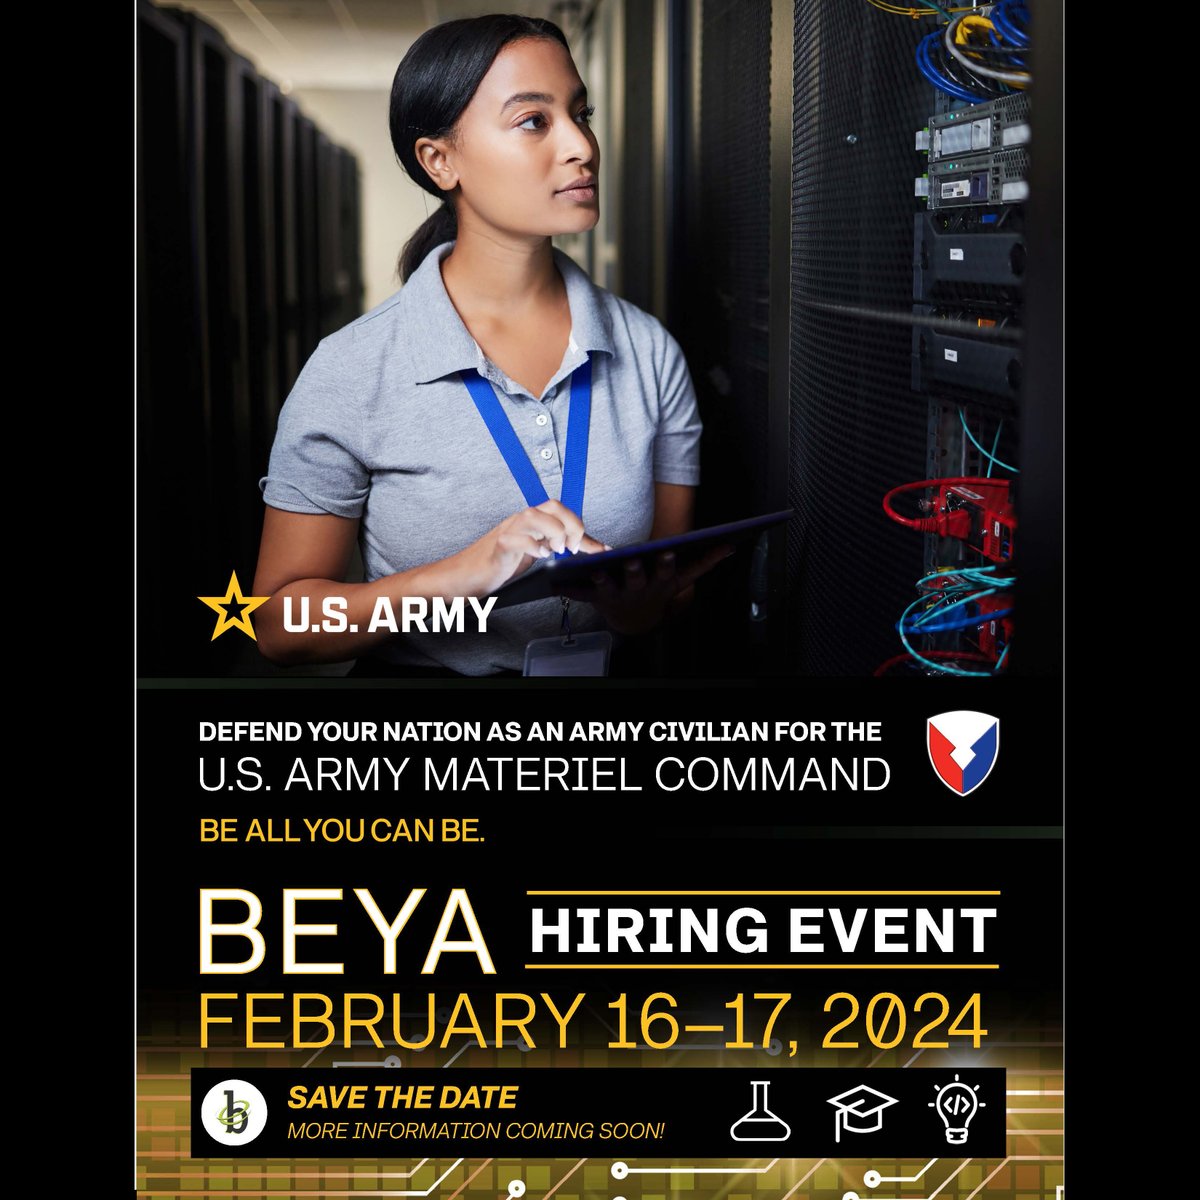 Looking for a job? From architect to utility systems supervisor, IMCOM has openings for qualified candidates. Attend the BEYA Hiring Event, FREE for job seekers. Attend in-person in Baltimore or virtually. #BeAllYouCanBe #BEYAstem

spr.ly/6011pzIzU